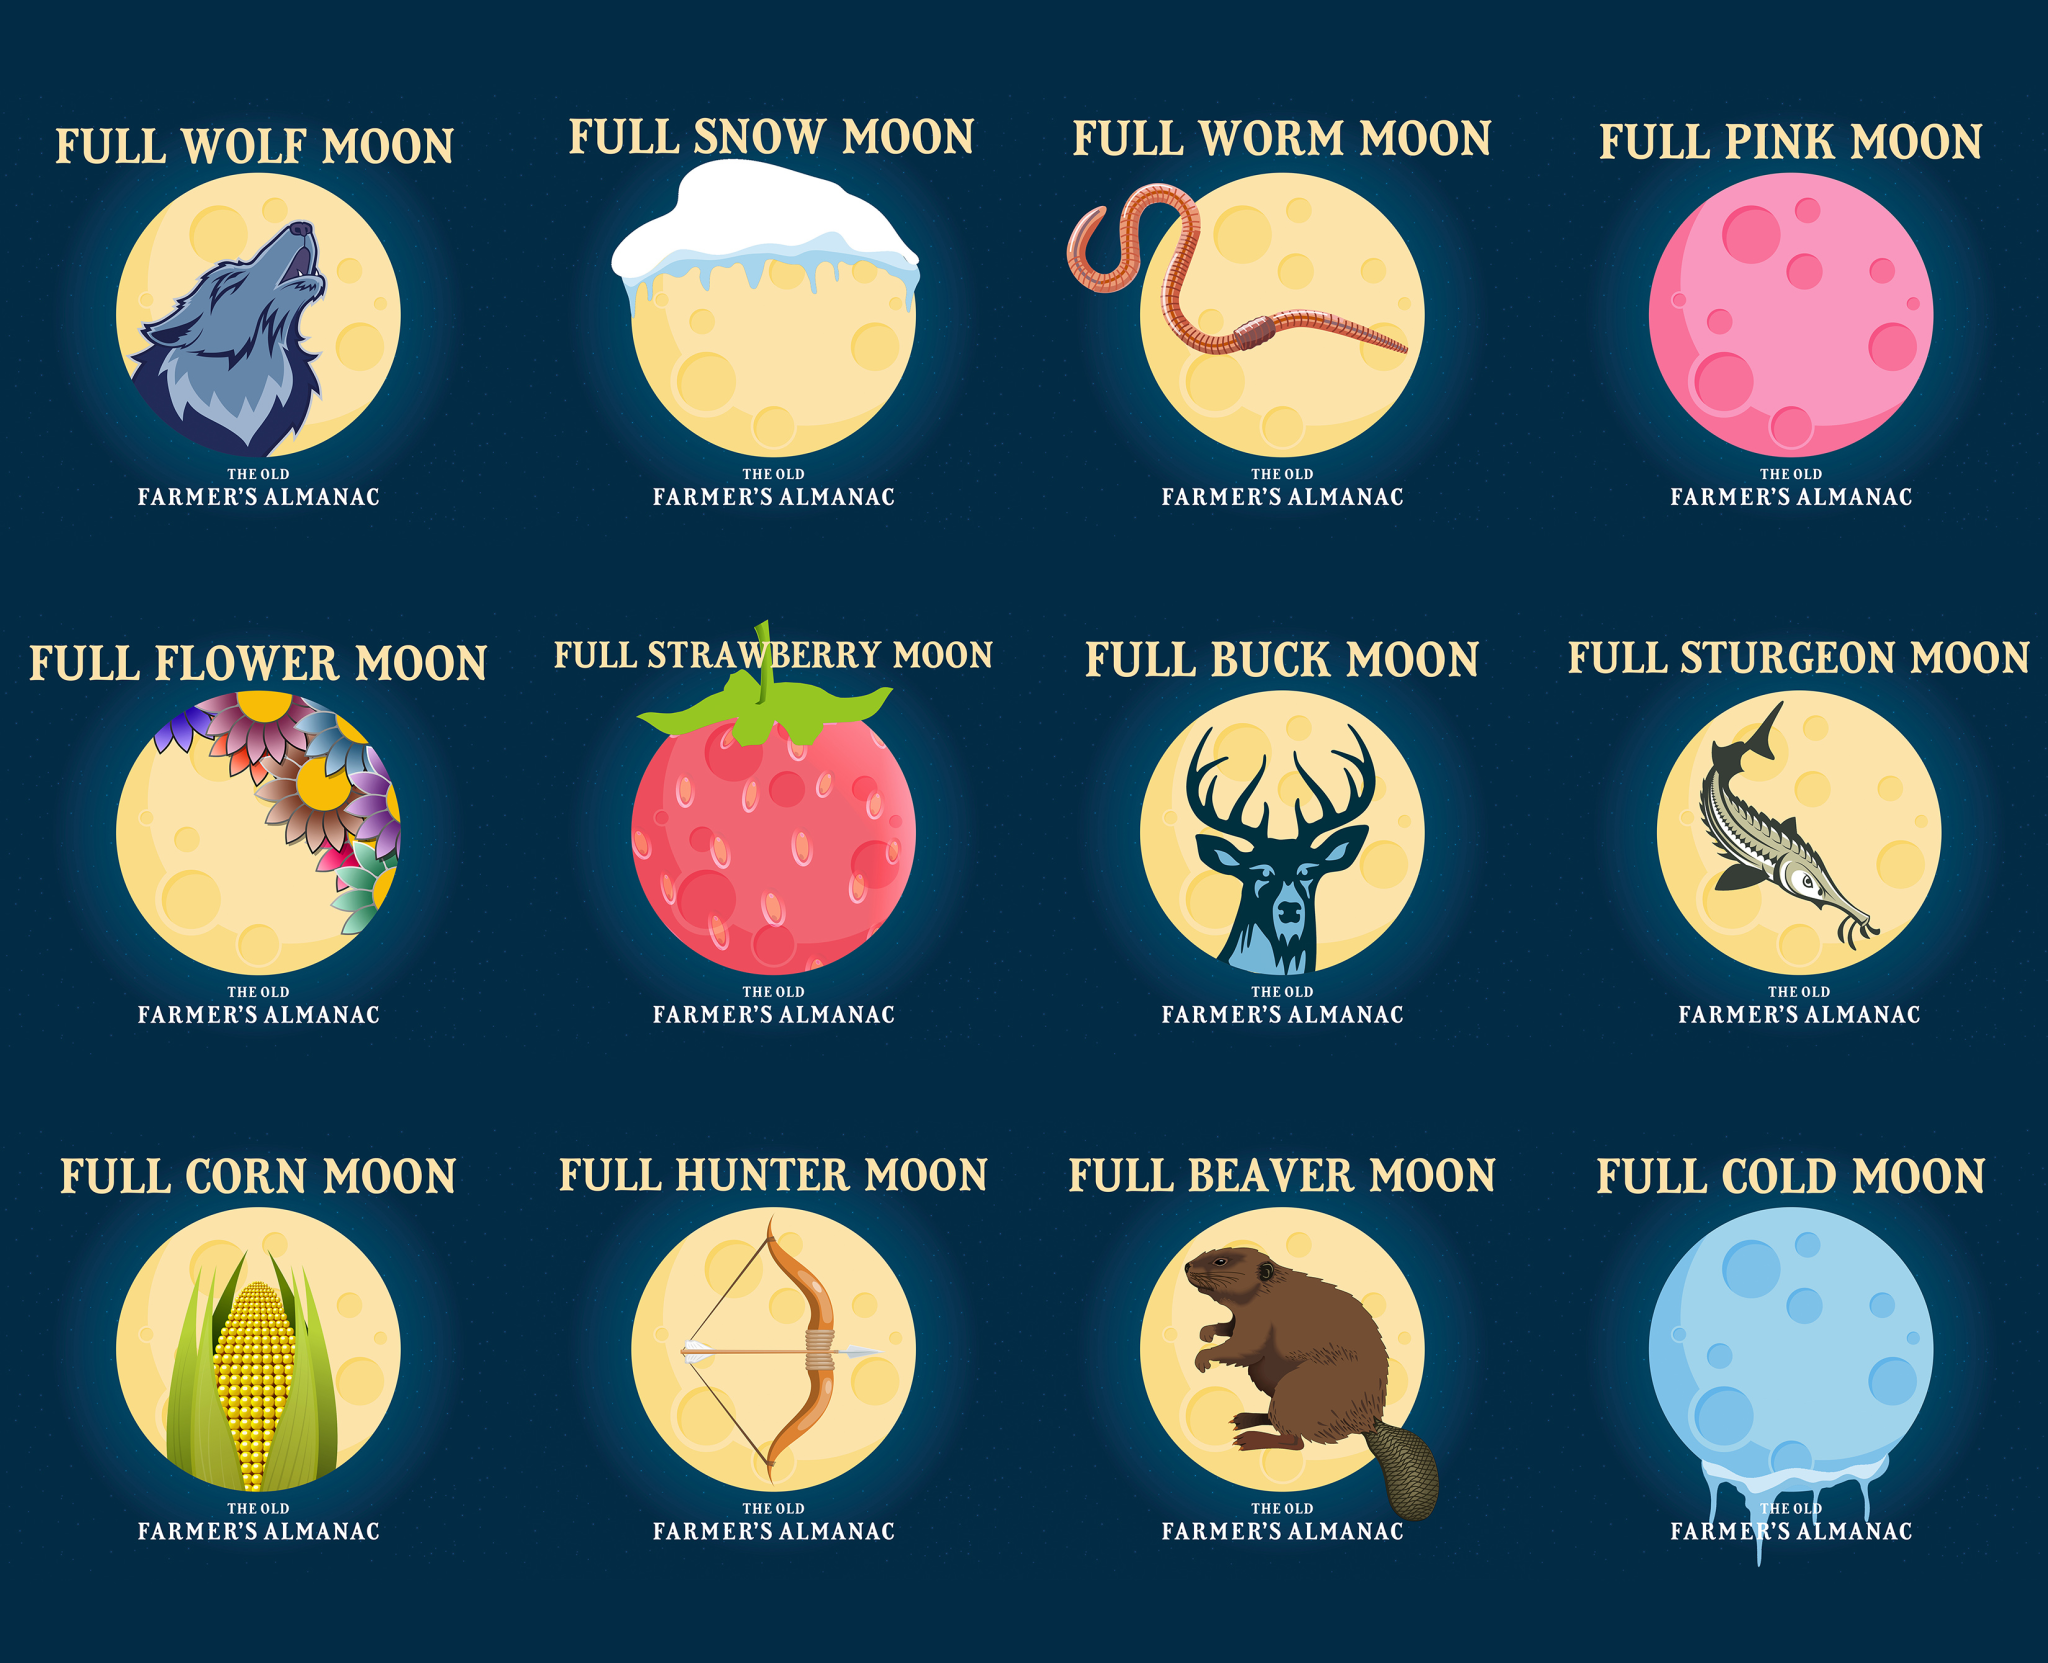 the old farmers almanac full moon names and illustrations